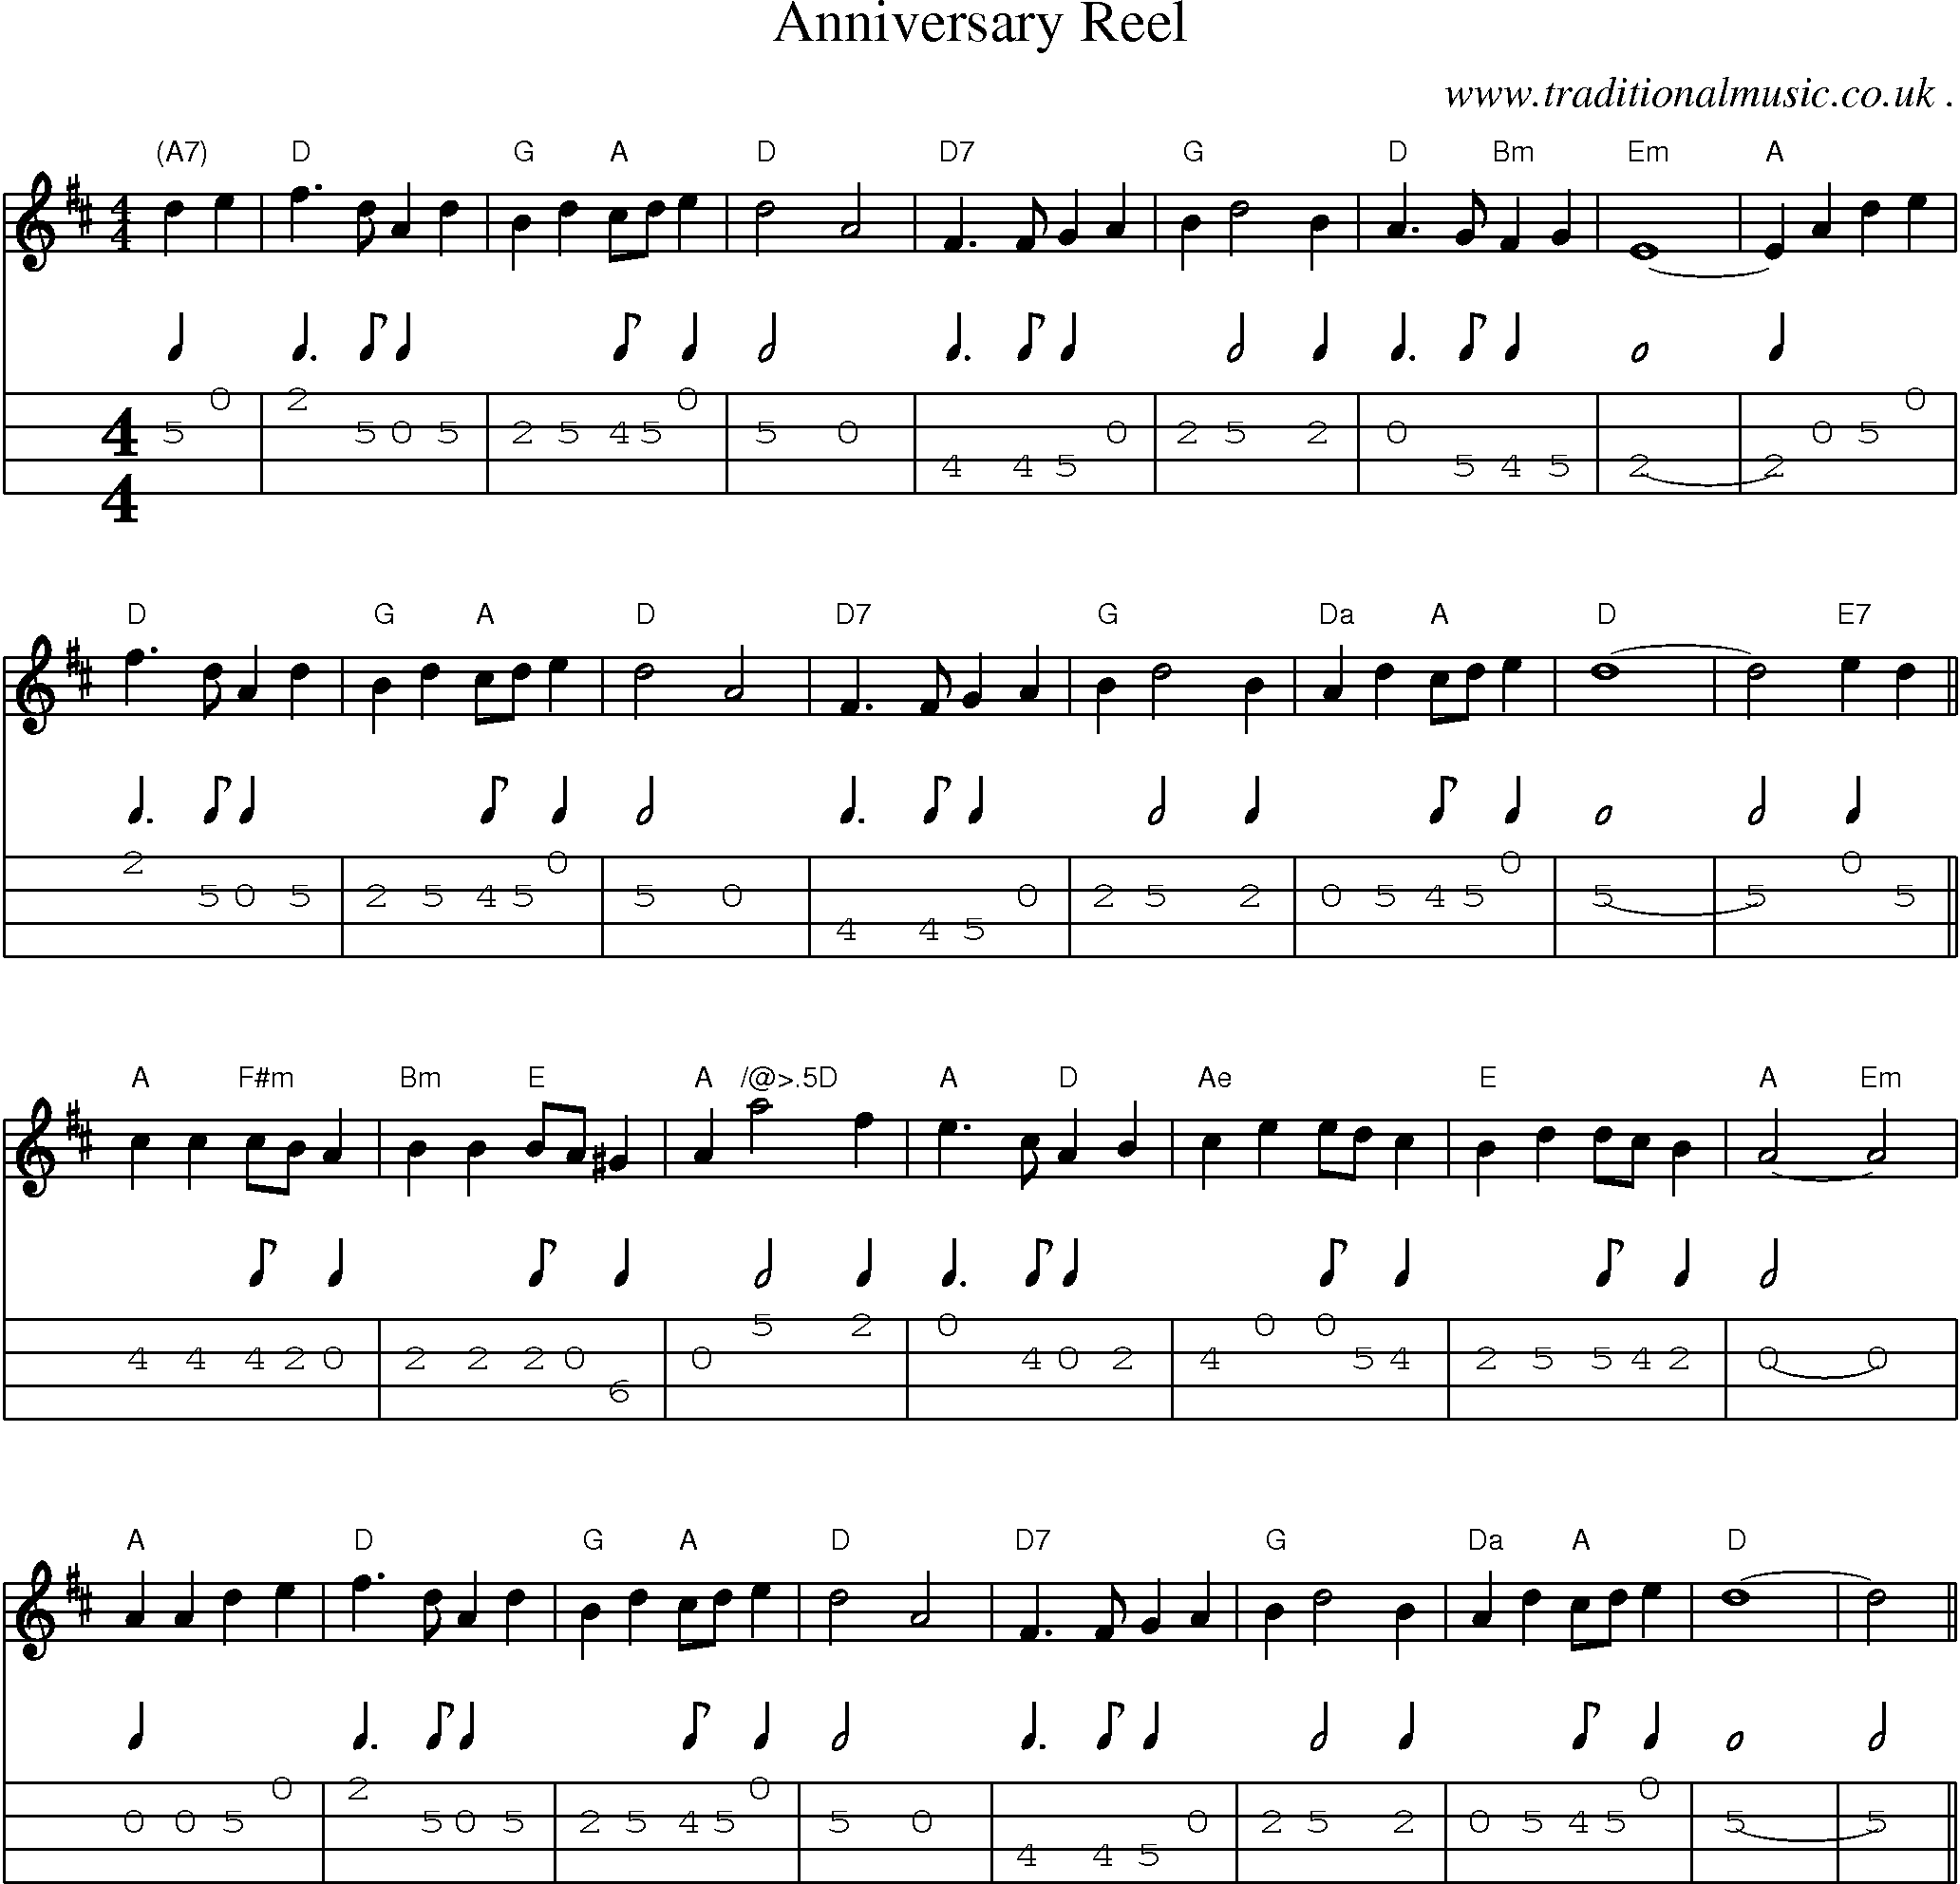 Sheet-Music and Mandolin Tabs for Anniversary Reel